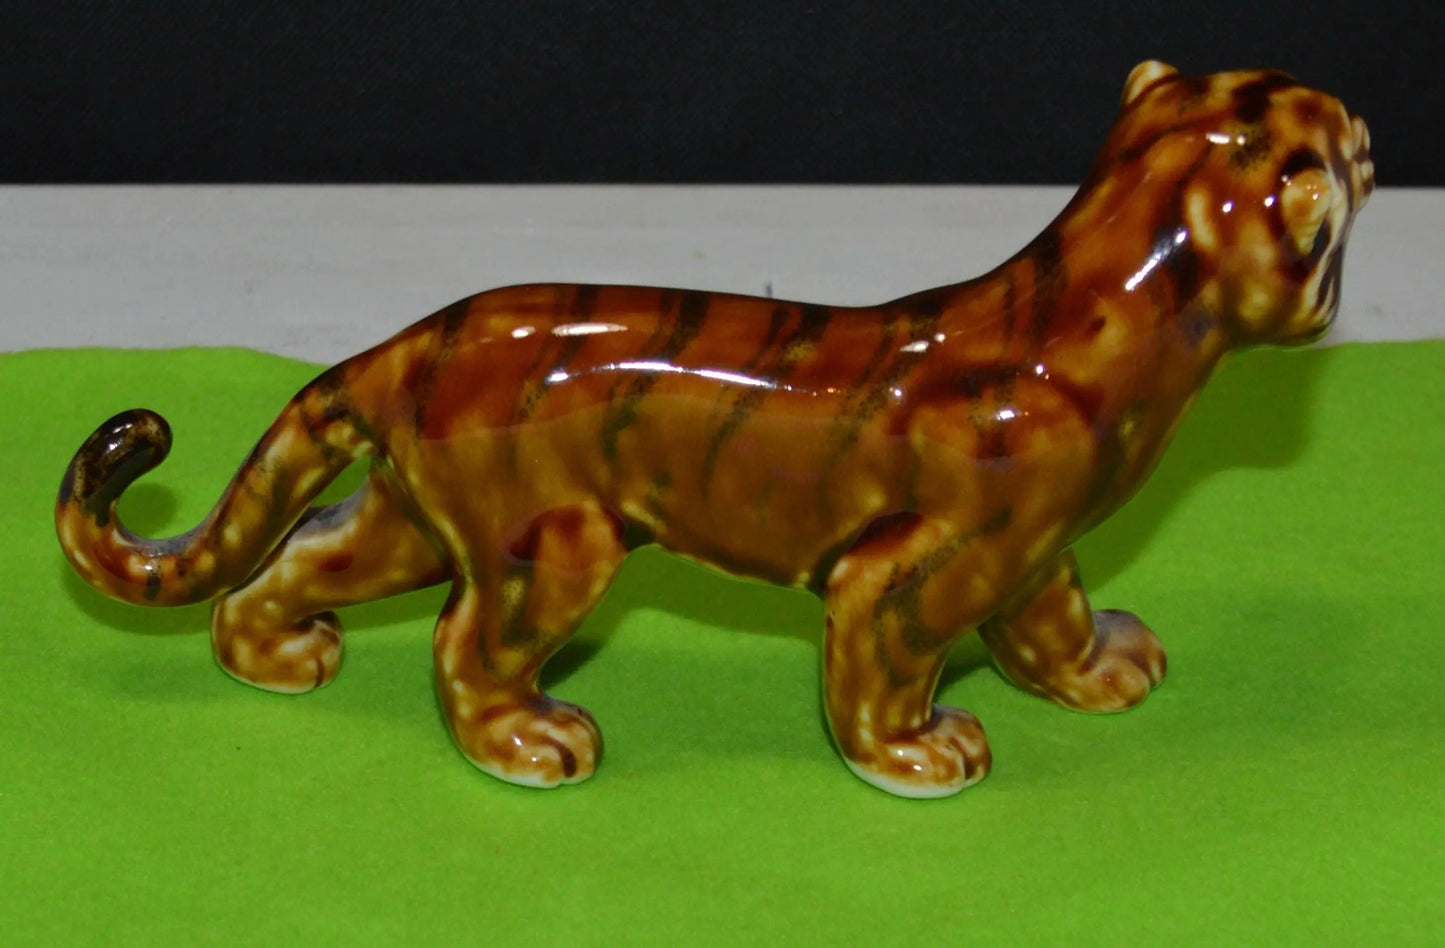 ANIMAL FIGURINE TIGER(PREVIOUSLY OWNED) VERY GOOD CONDITION - TMD167207